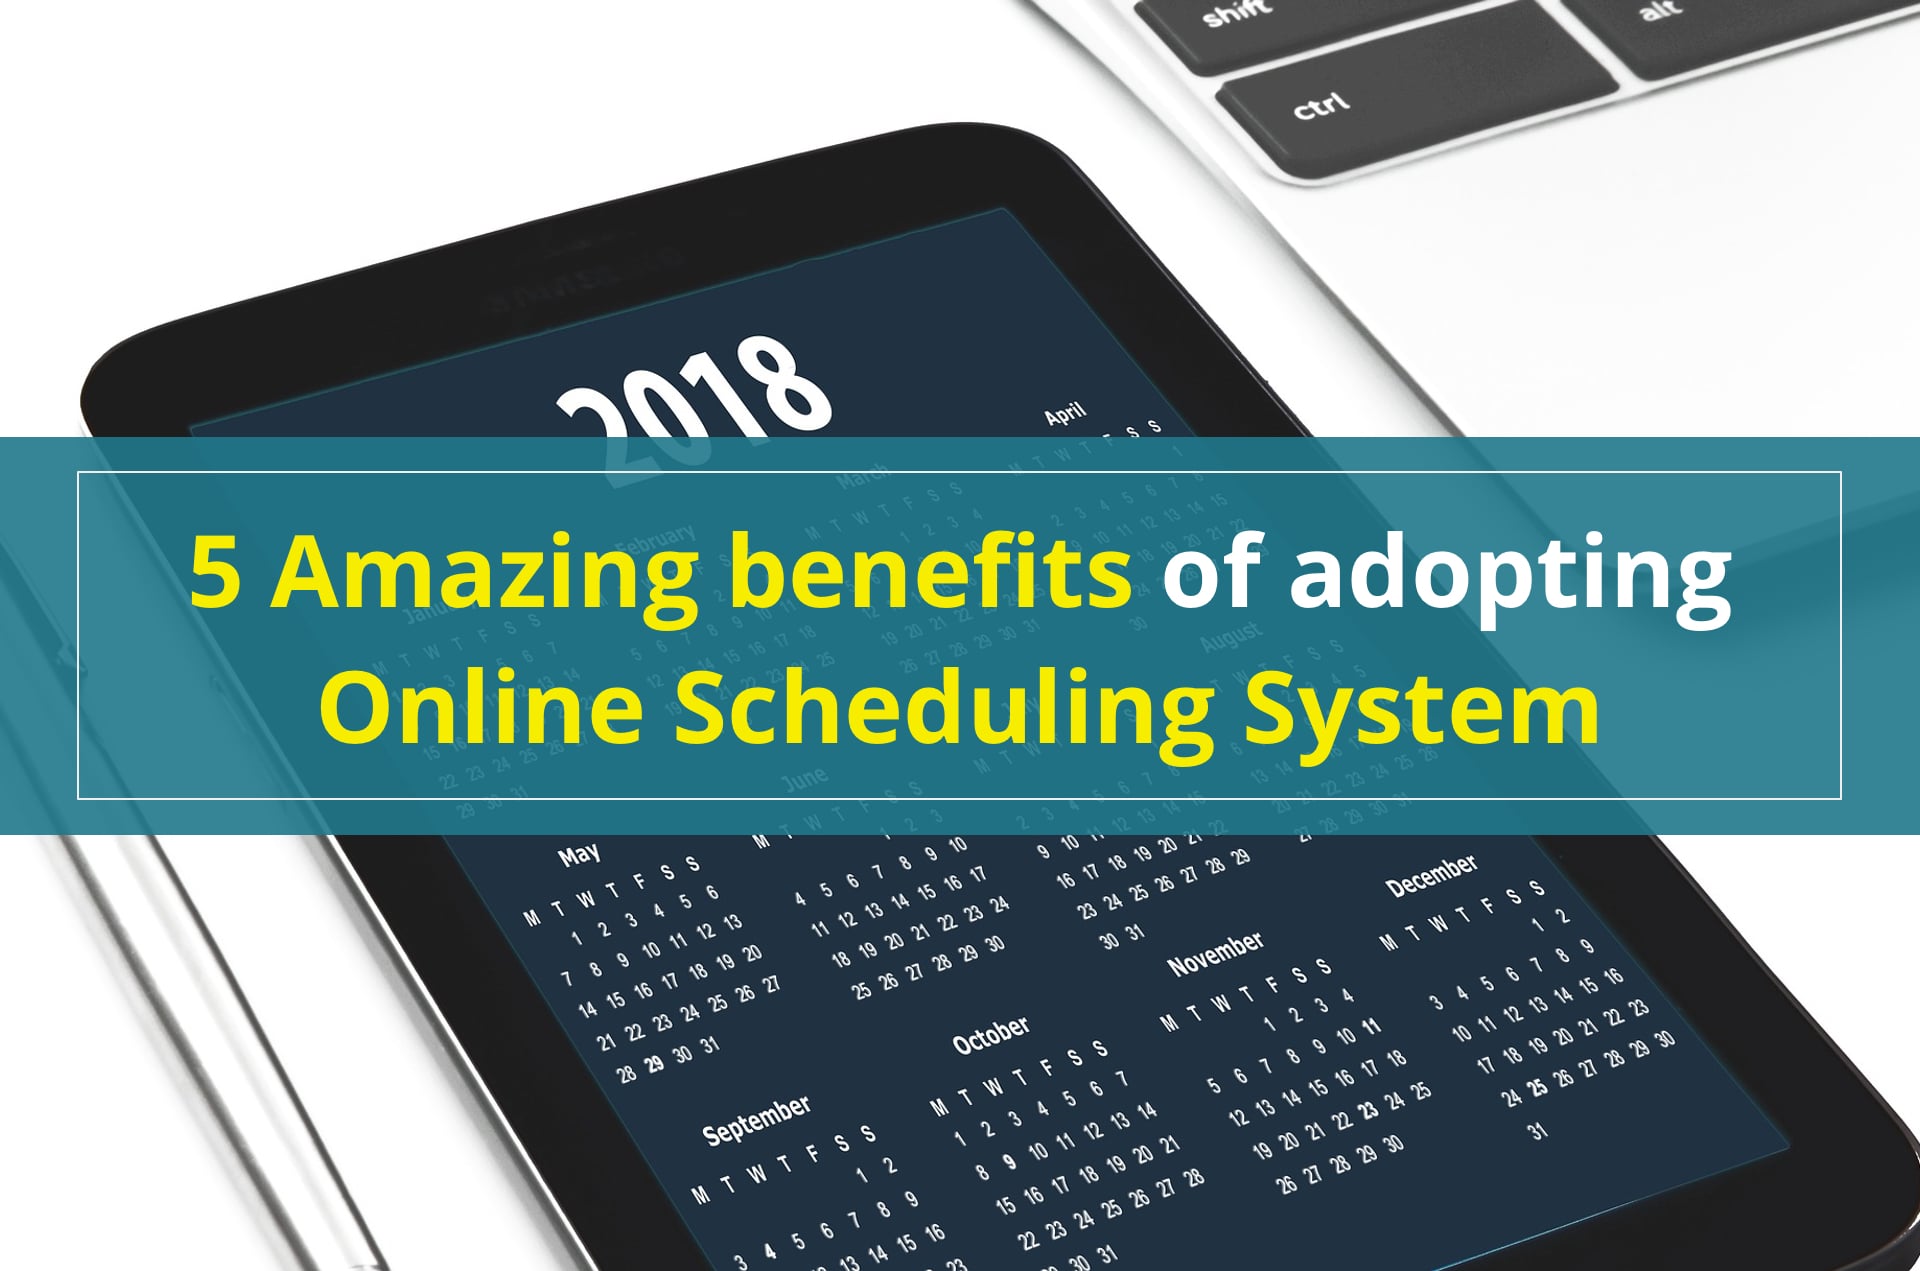 How does online appointment scheduling leads to advancement of a repair business?